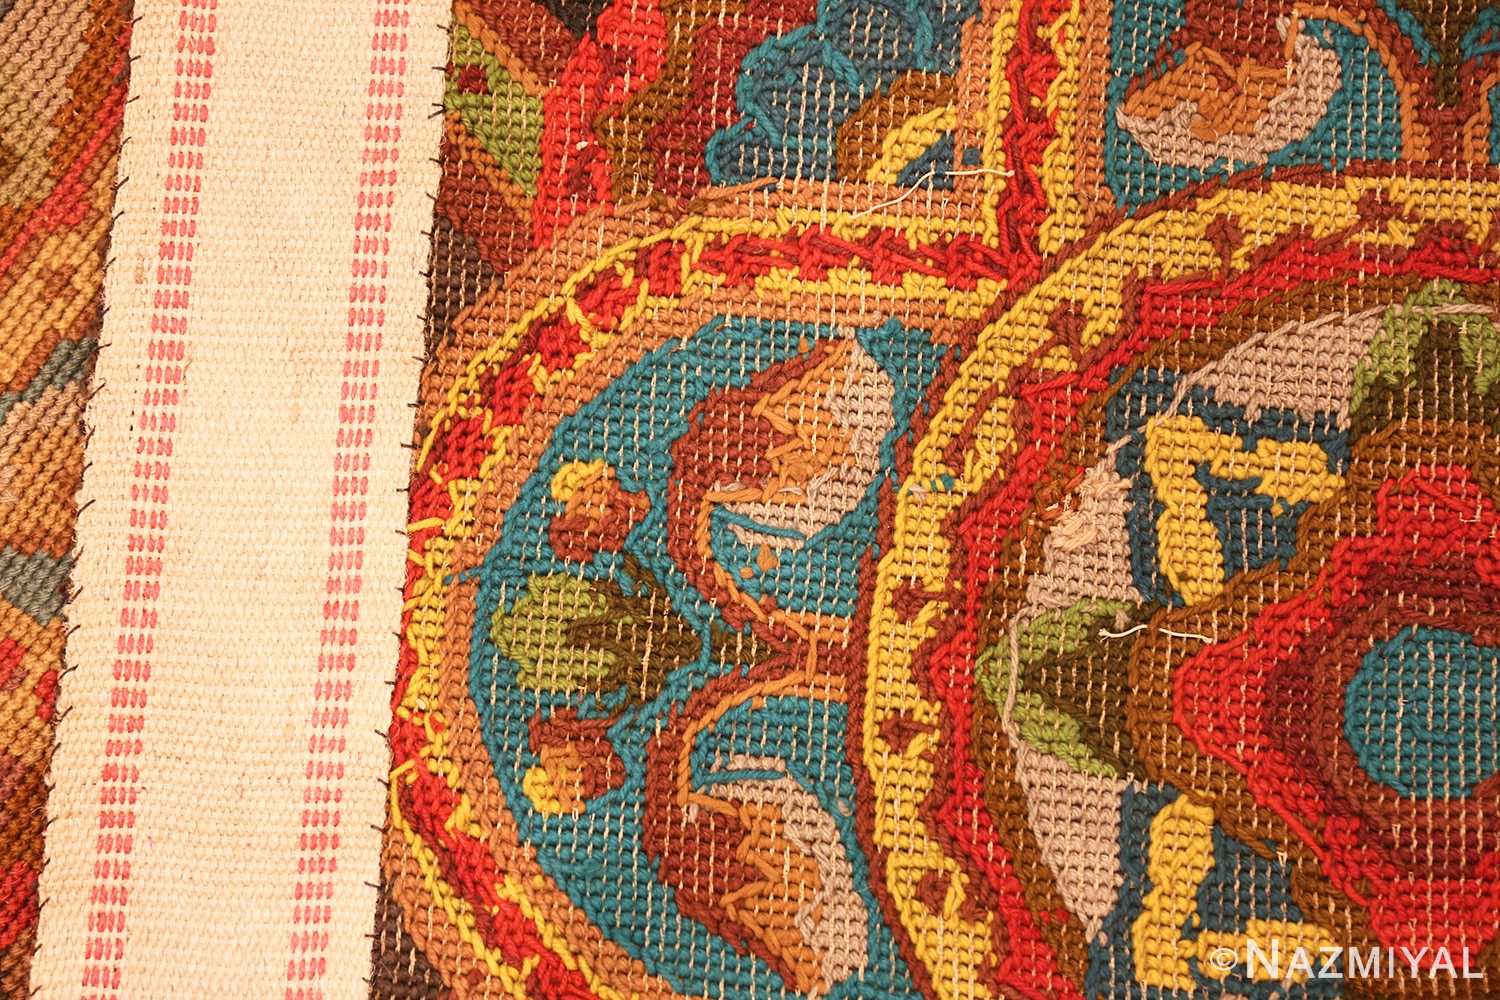 The Best 10 Examples Of chinese needlework